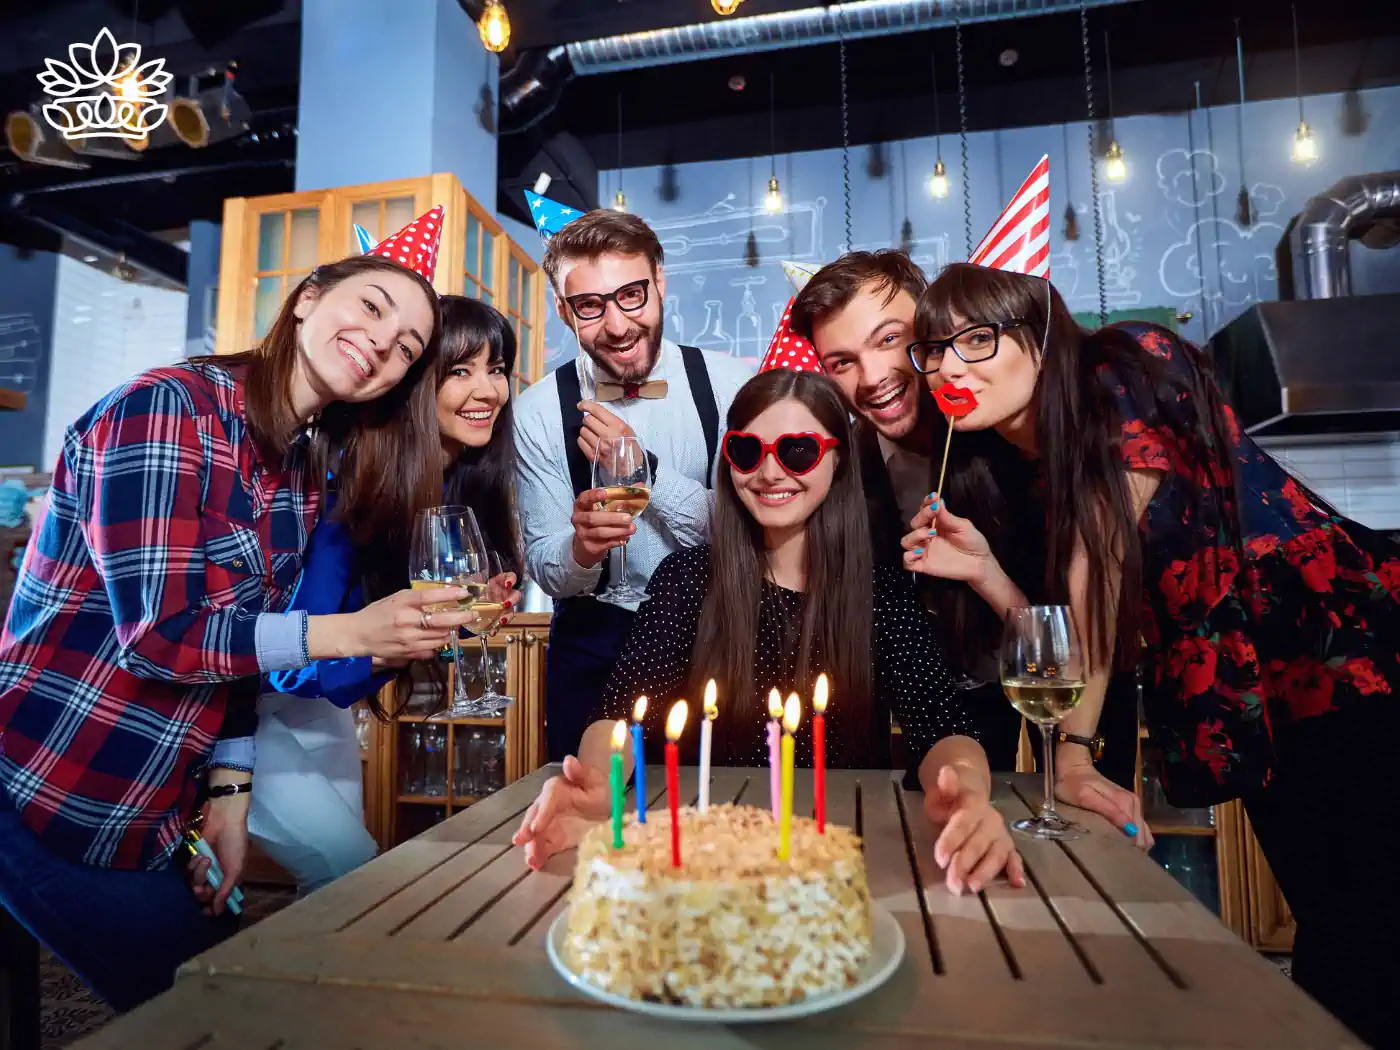 A group of friends wearing party hats and glasses, holding a birthday cake with lit candles. Fabulous Flowers and Gifts. Taurus Flowers & Gifts Collection.